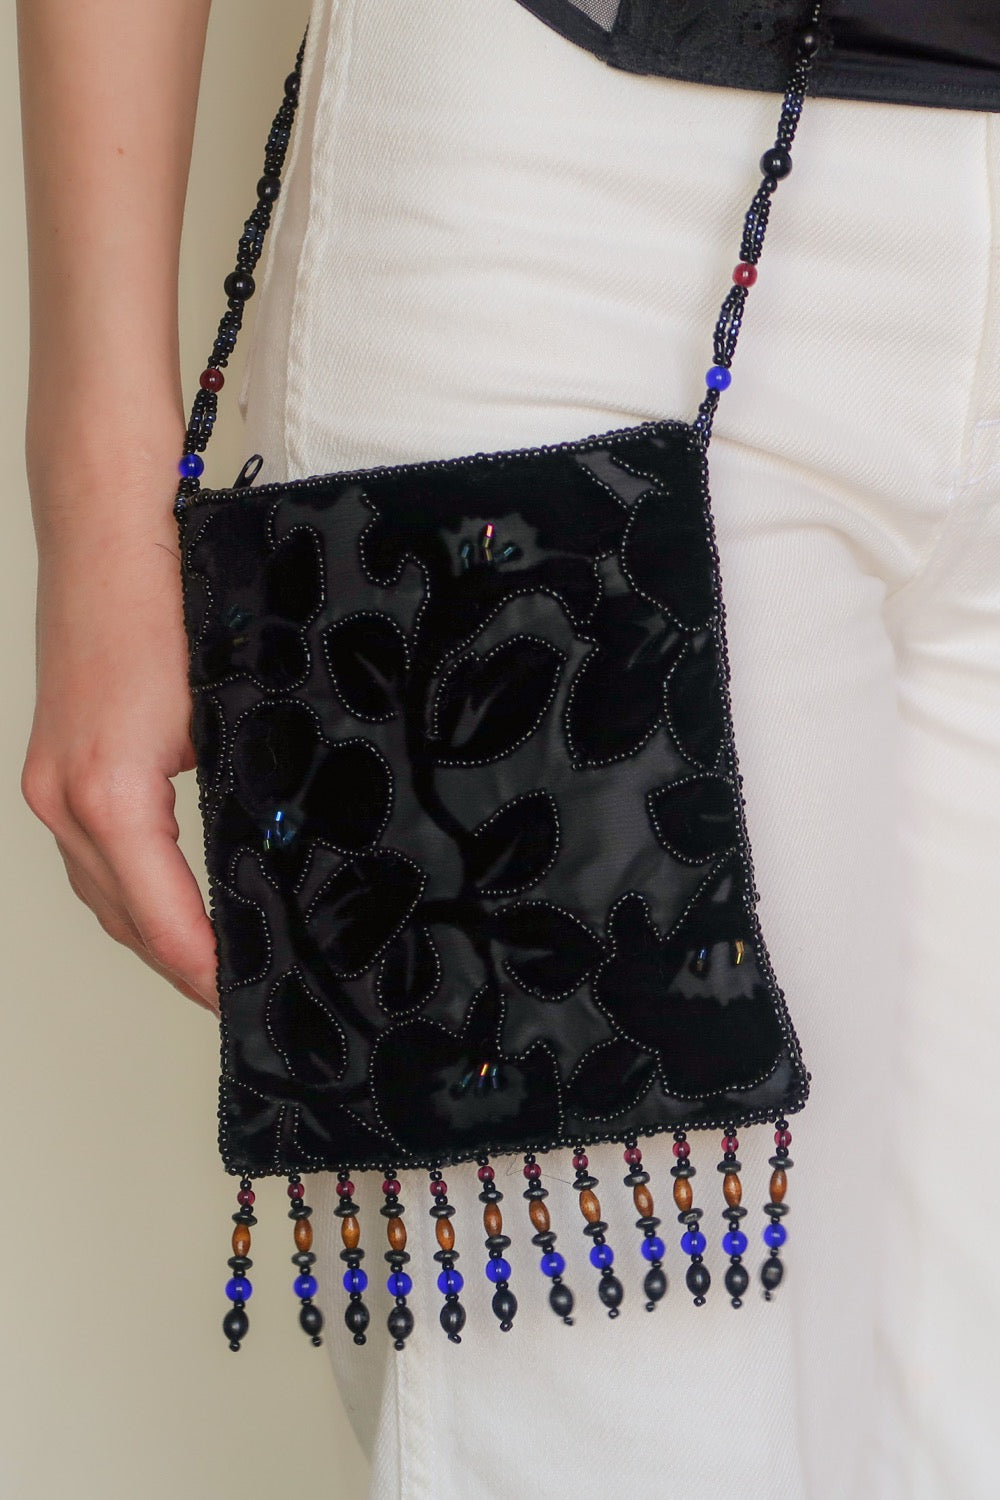 Late 60s/ Early 70s Made in Hong Kong Beaded Purse